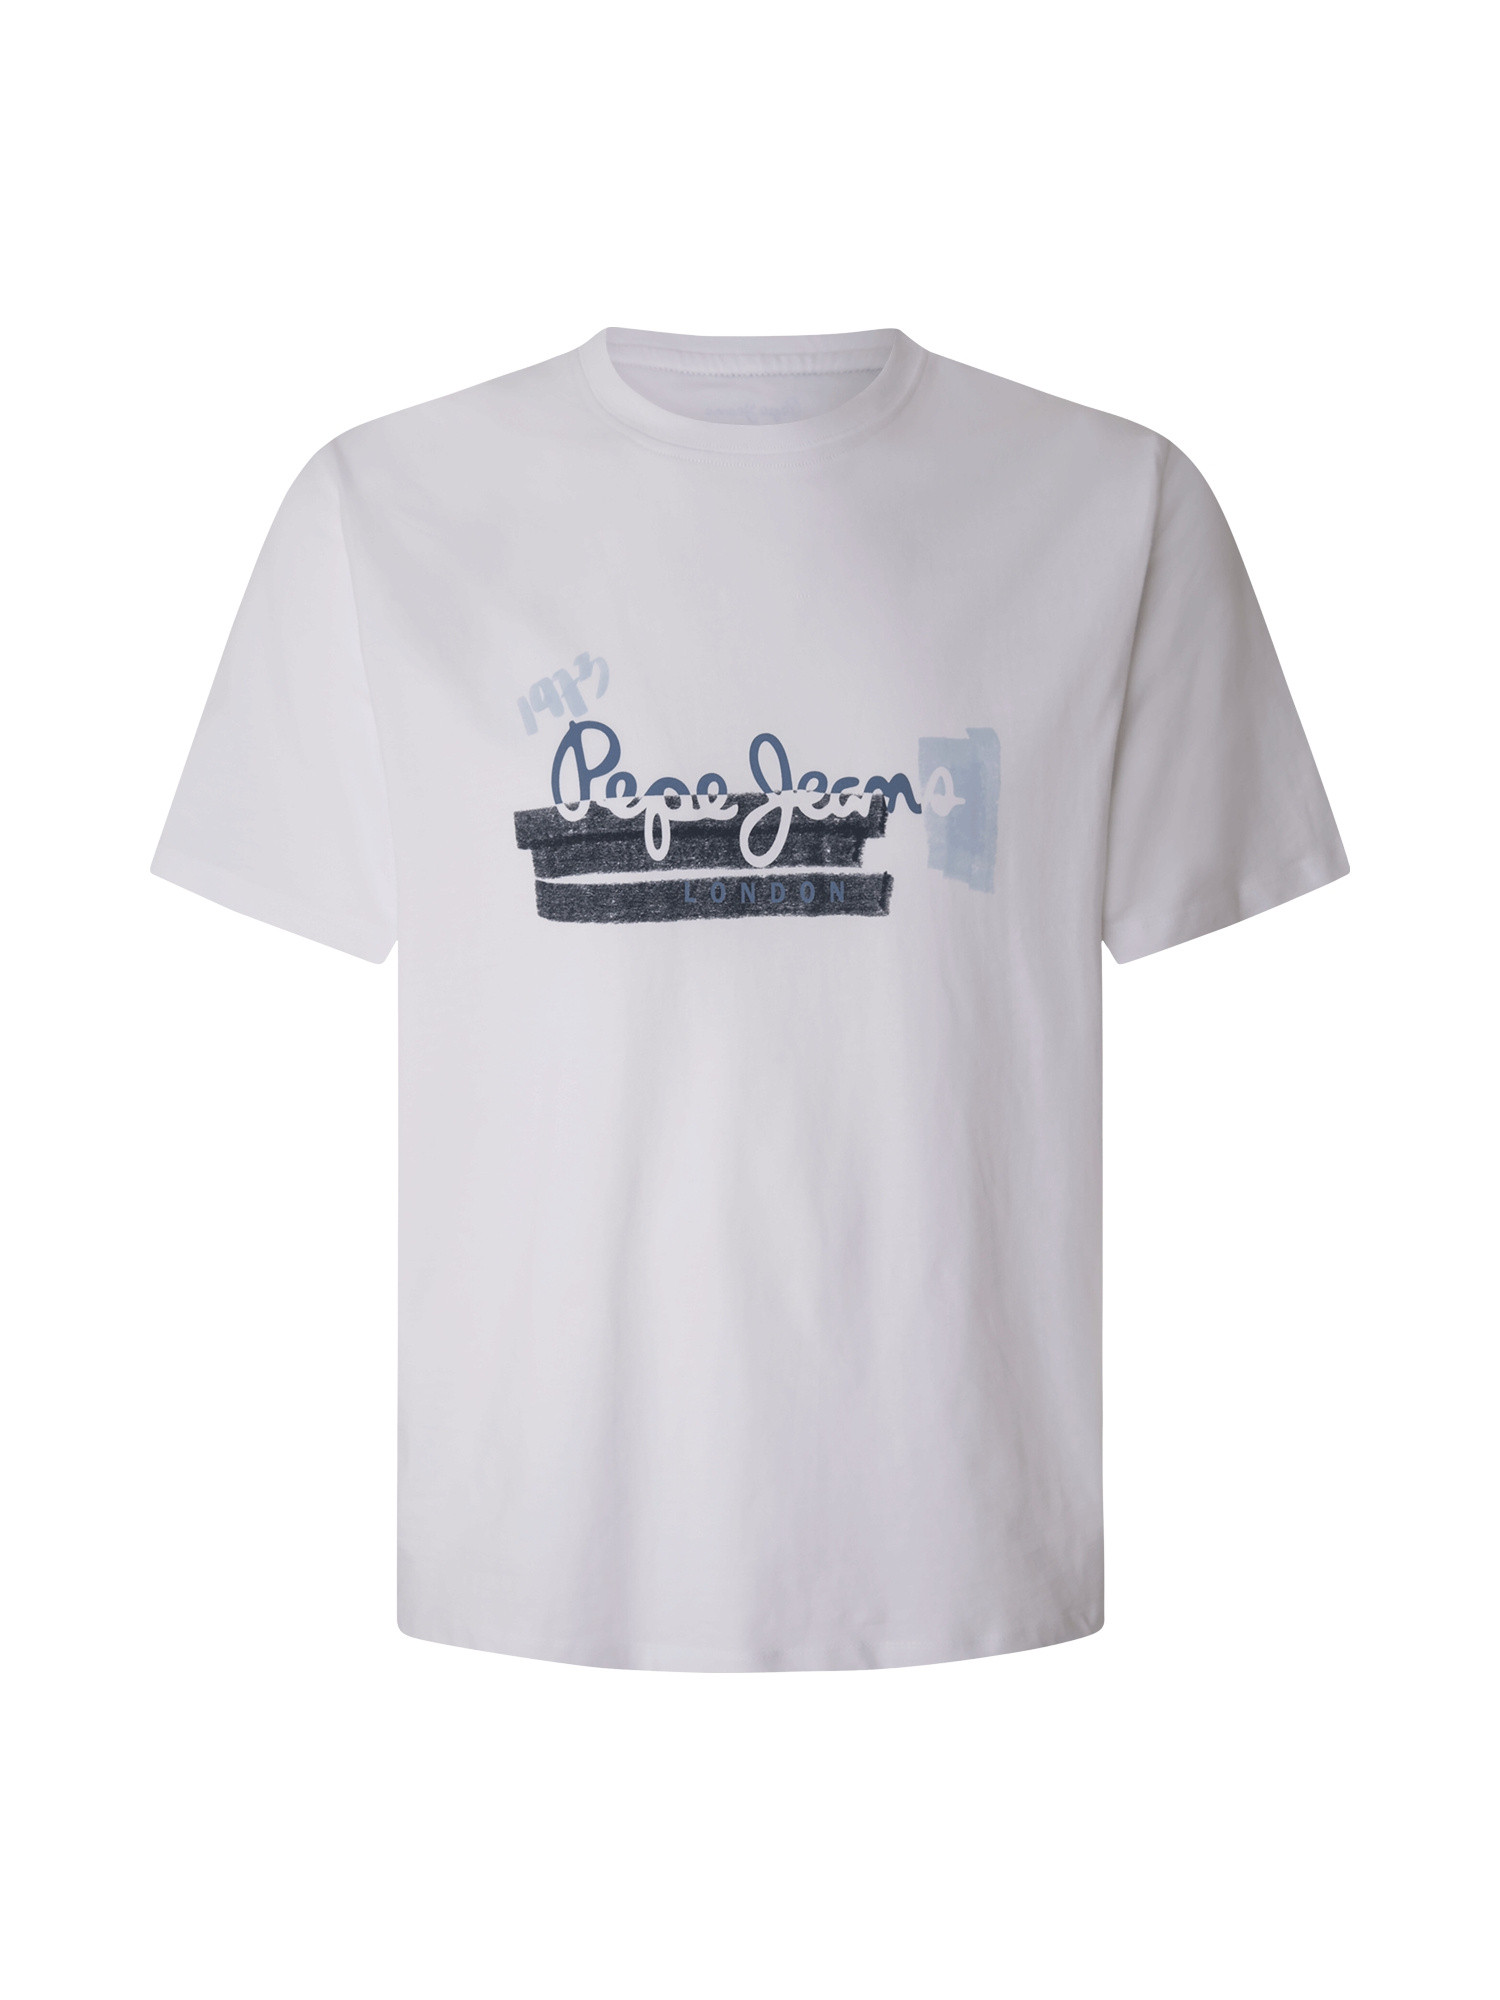 Pepe Jeans - Printed cotton T-shir, White, large image number 0